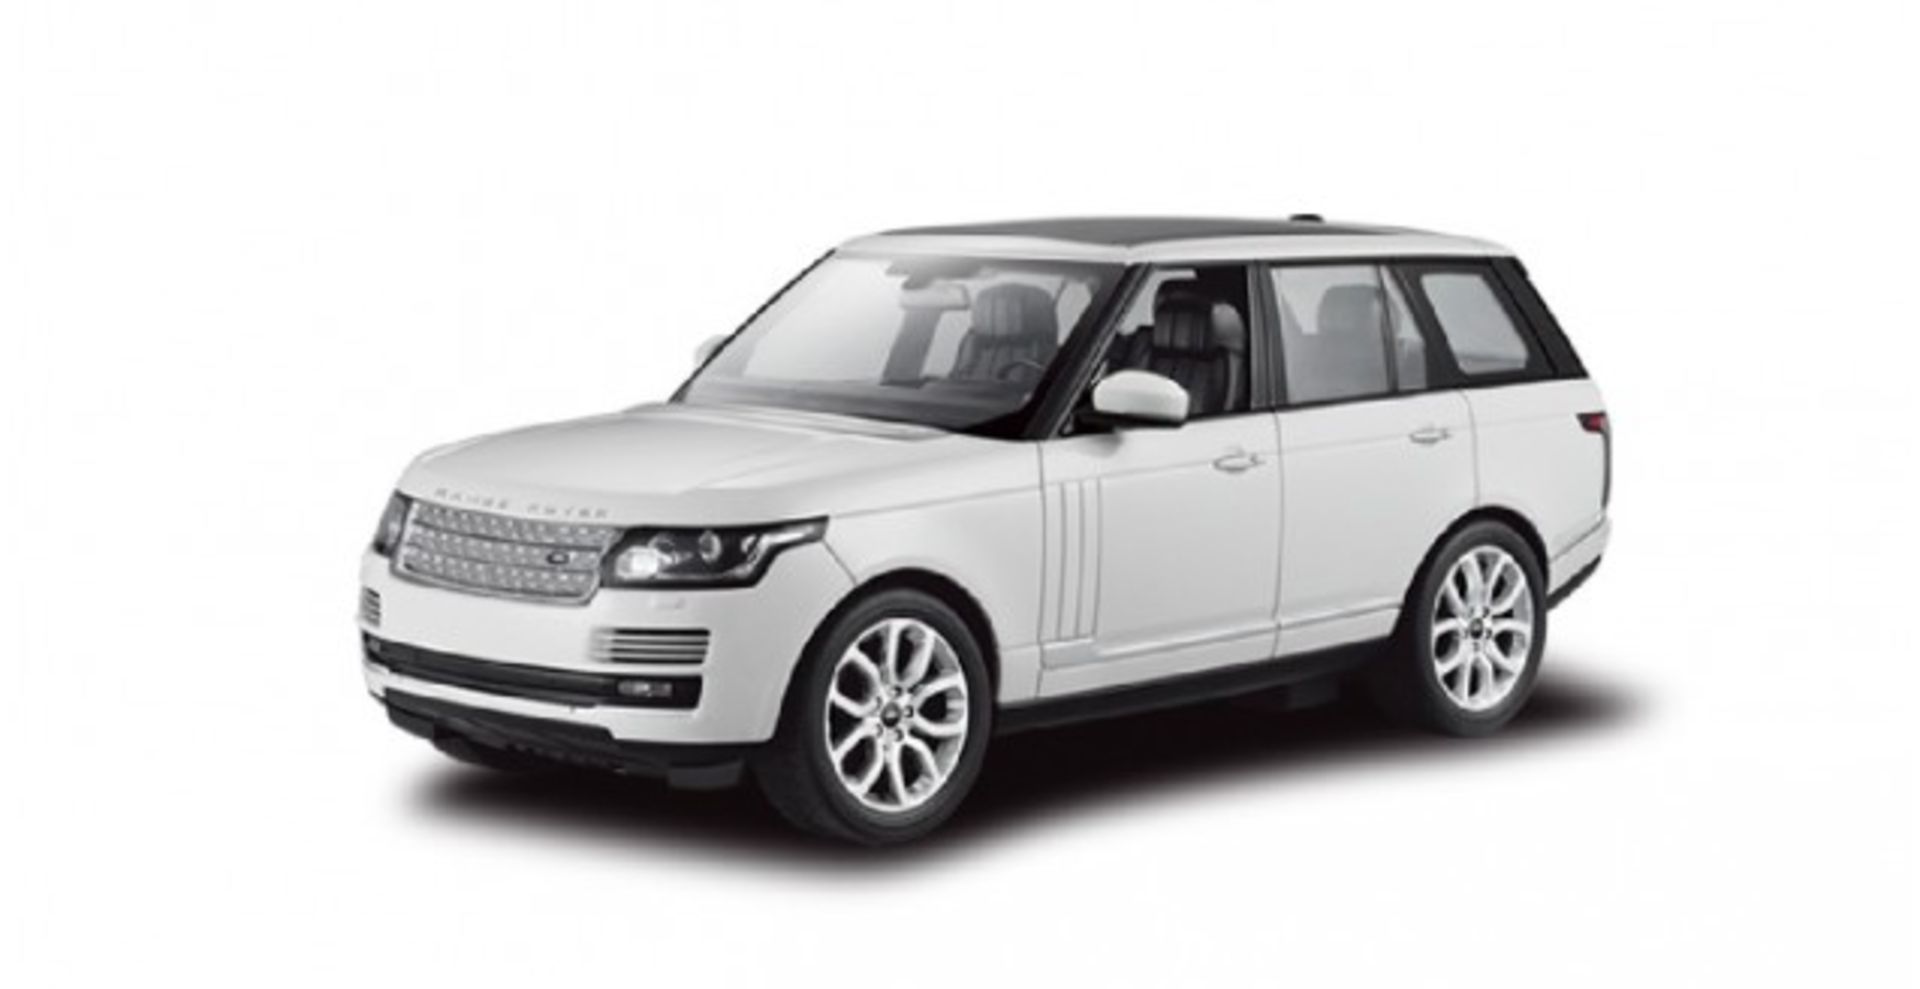 V Brand New Range Rover 1:14 sCALE Full Function RC Car With Headlights And Tail Lights eBay